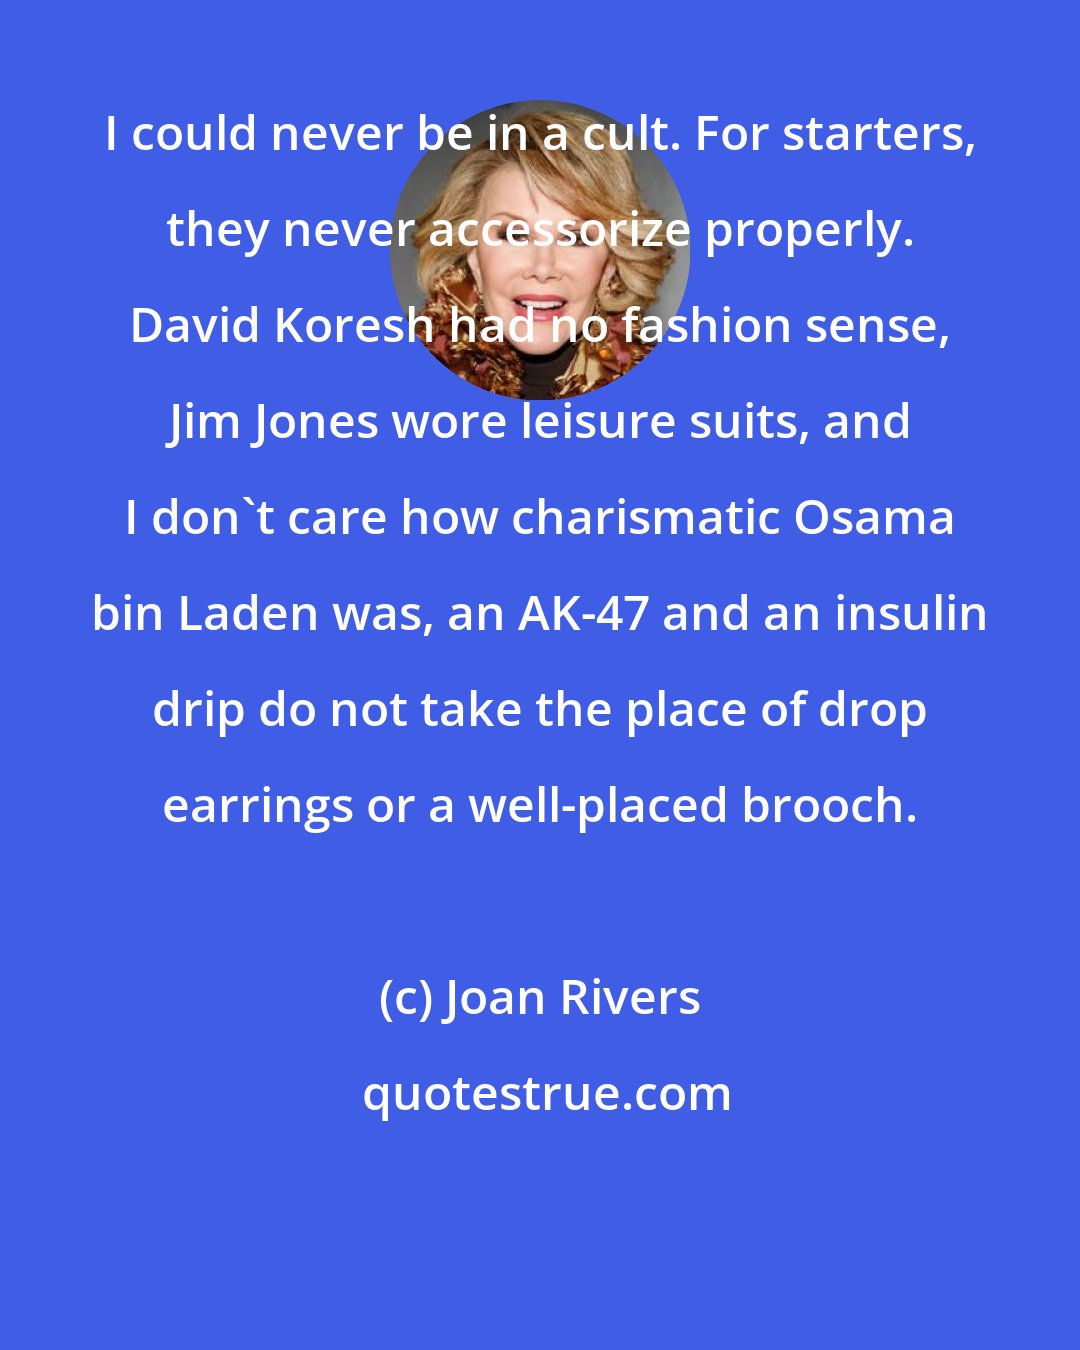 Joan Rivers: I could never be in a cult. For starters, they never accessorize properly. David Koresh had no fashion sense, Jim Jones wore leisure suits, and I don't care how charismatic Osama bin Laden was, an AK-47 and an insulin drip do not take the place of drop earrings or a well-placed brooch.